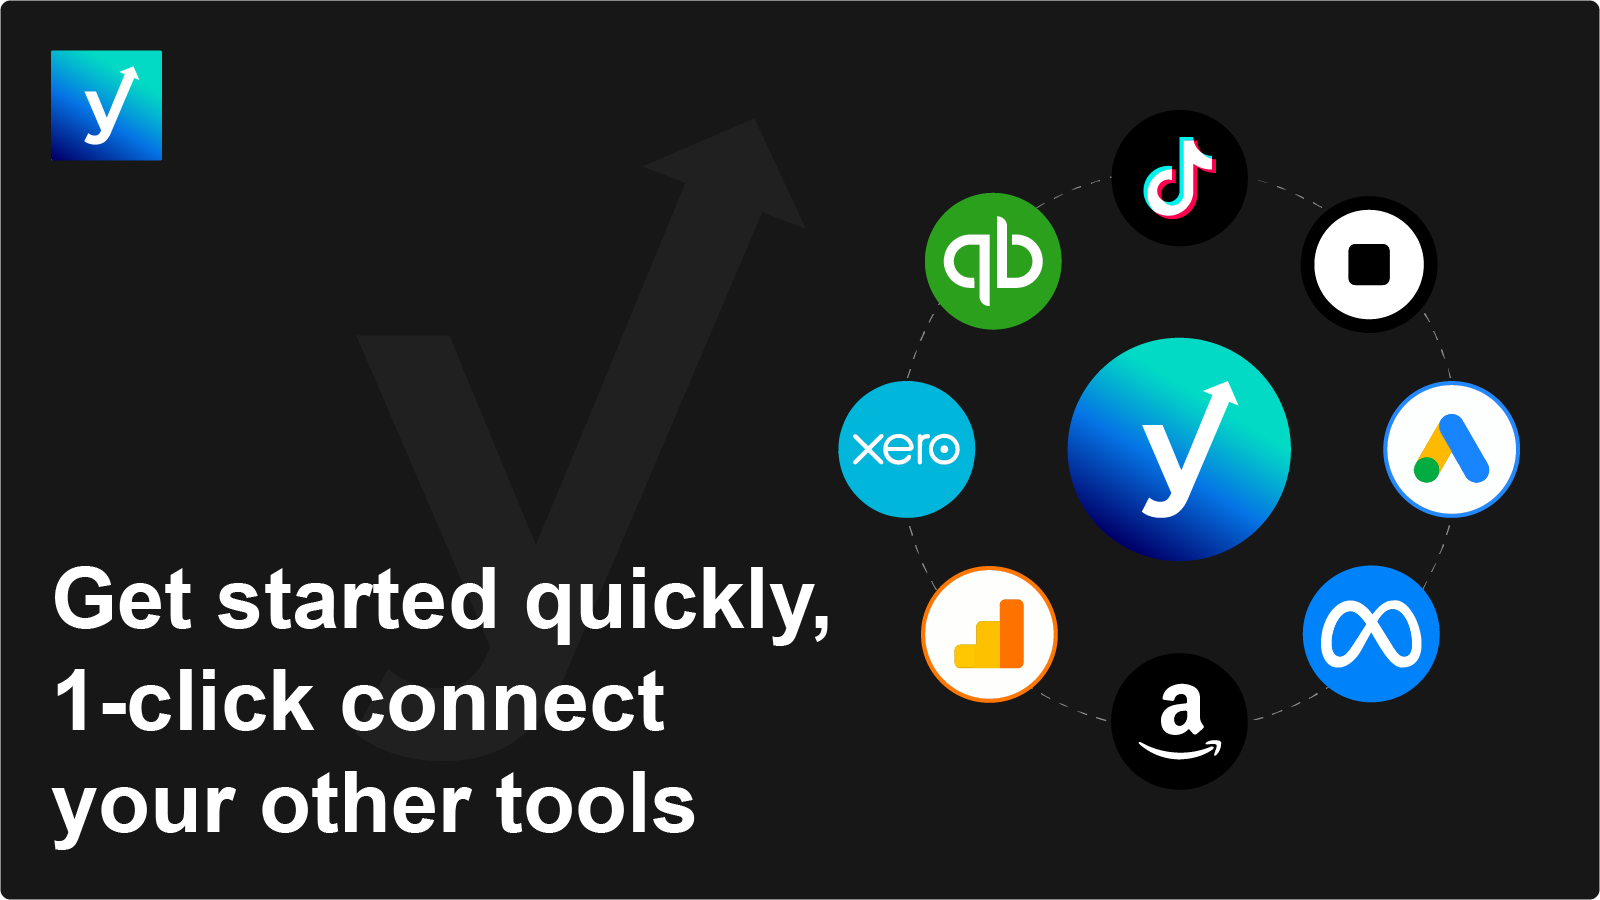 Get started quickly, 1-click connect your other tools to Yosoku